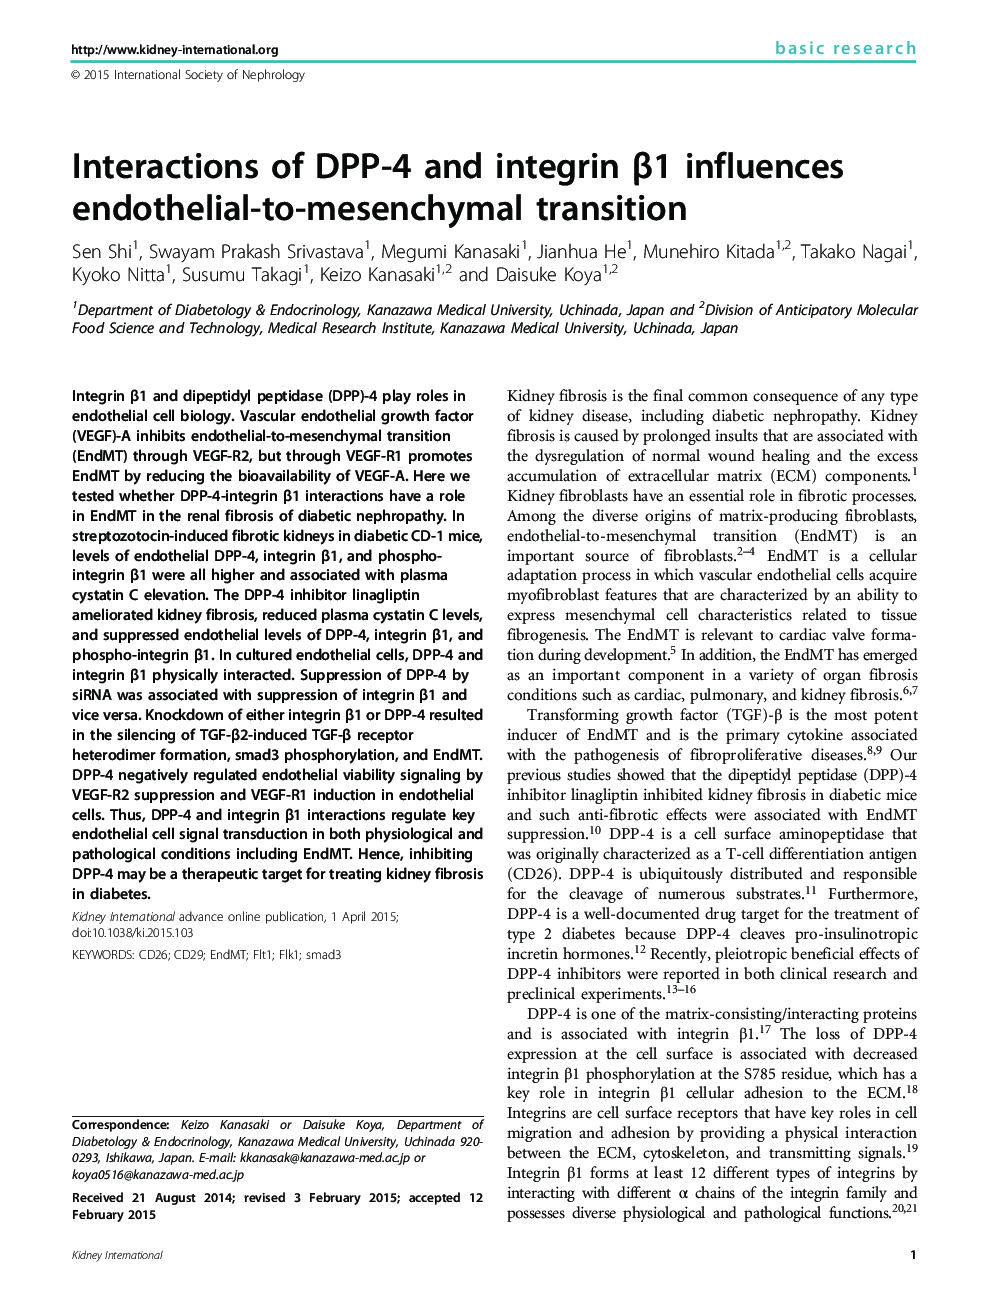 Interactions of DPP-4 and integrin Î²1 influences endothelial-to-mesenchymal transition